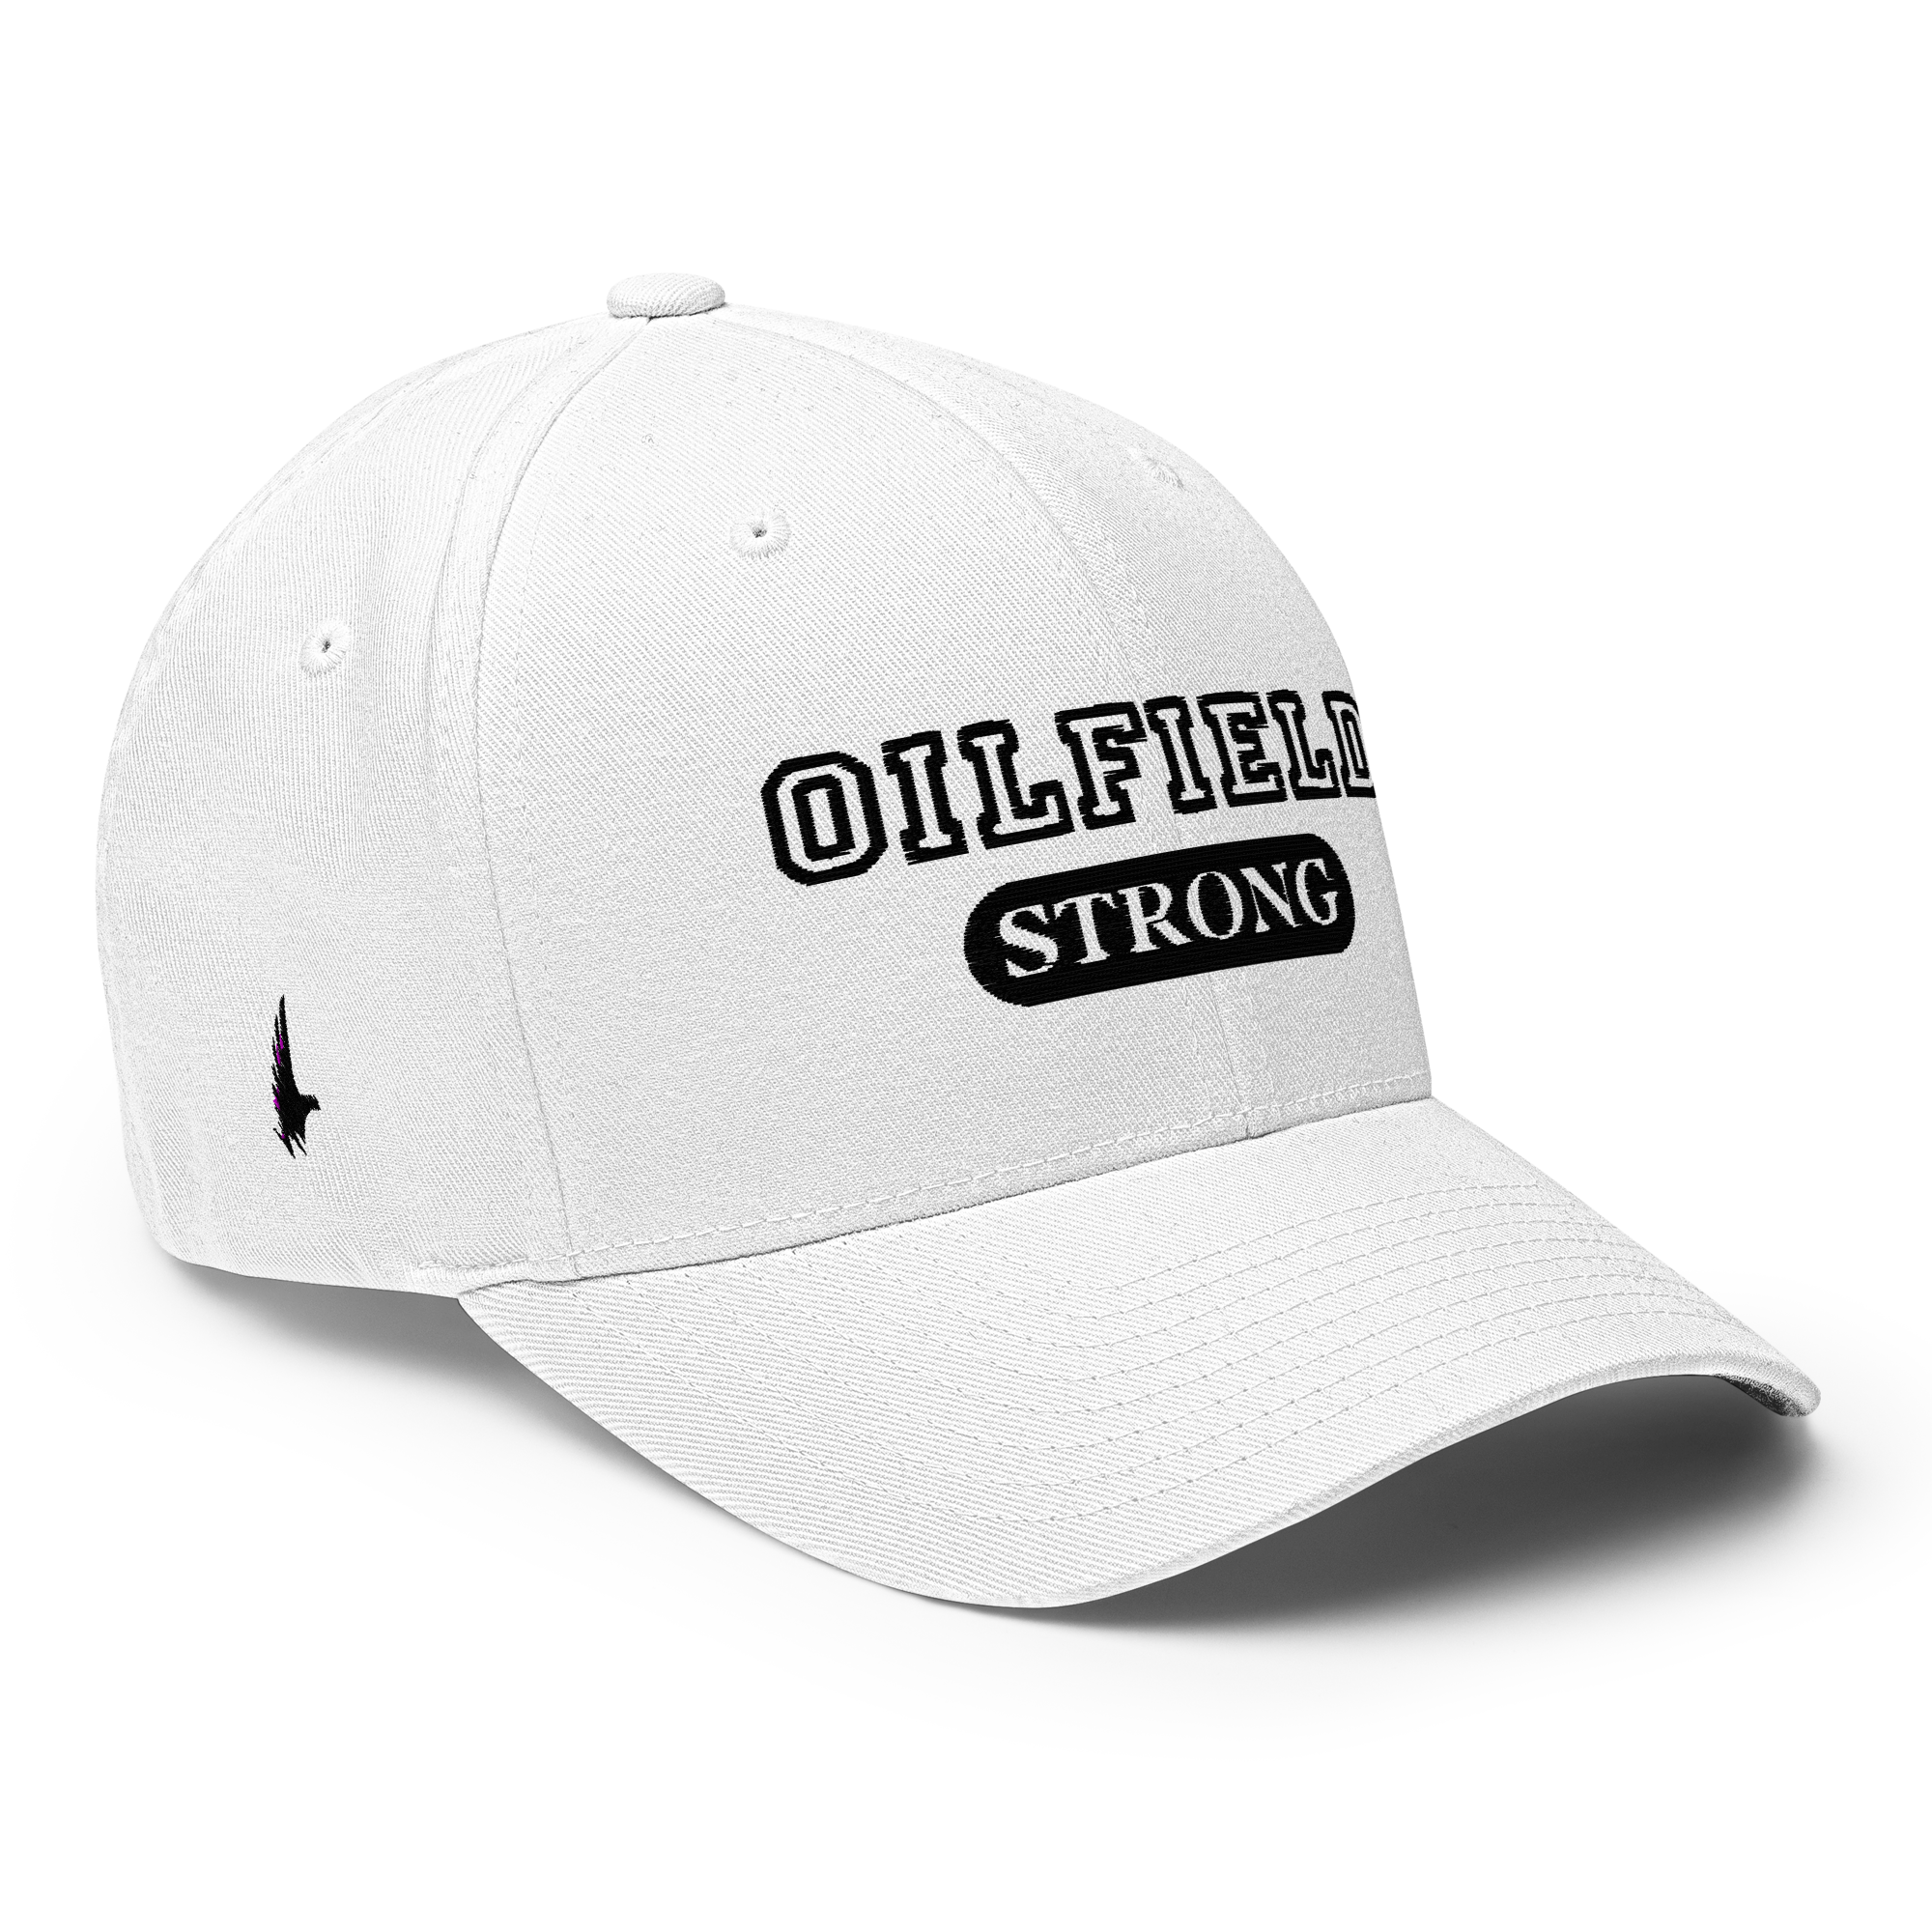 Oilfield Strong Fitted Hat White - Loyalty Vibes